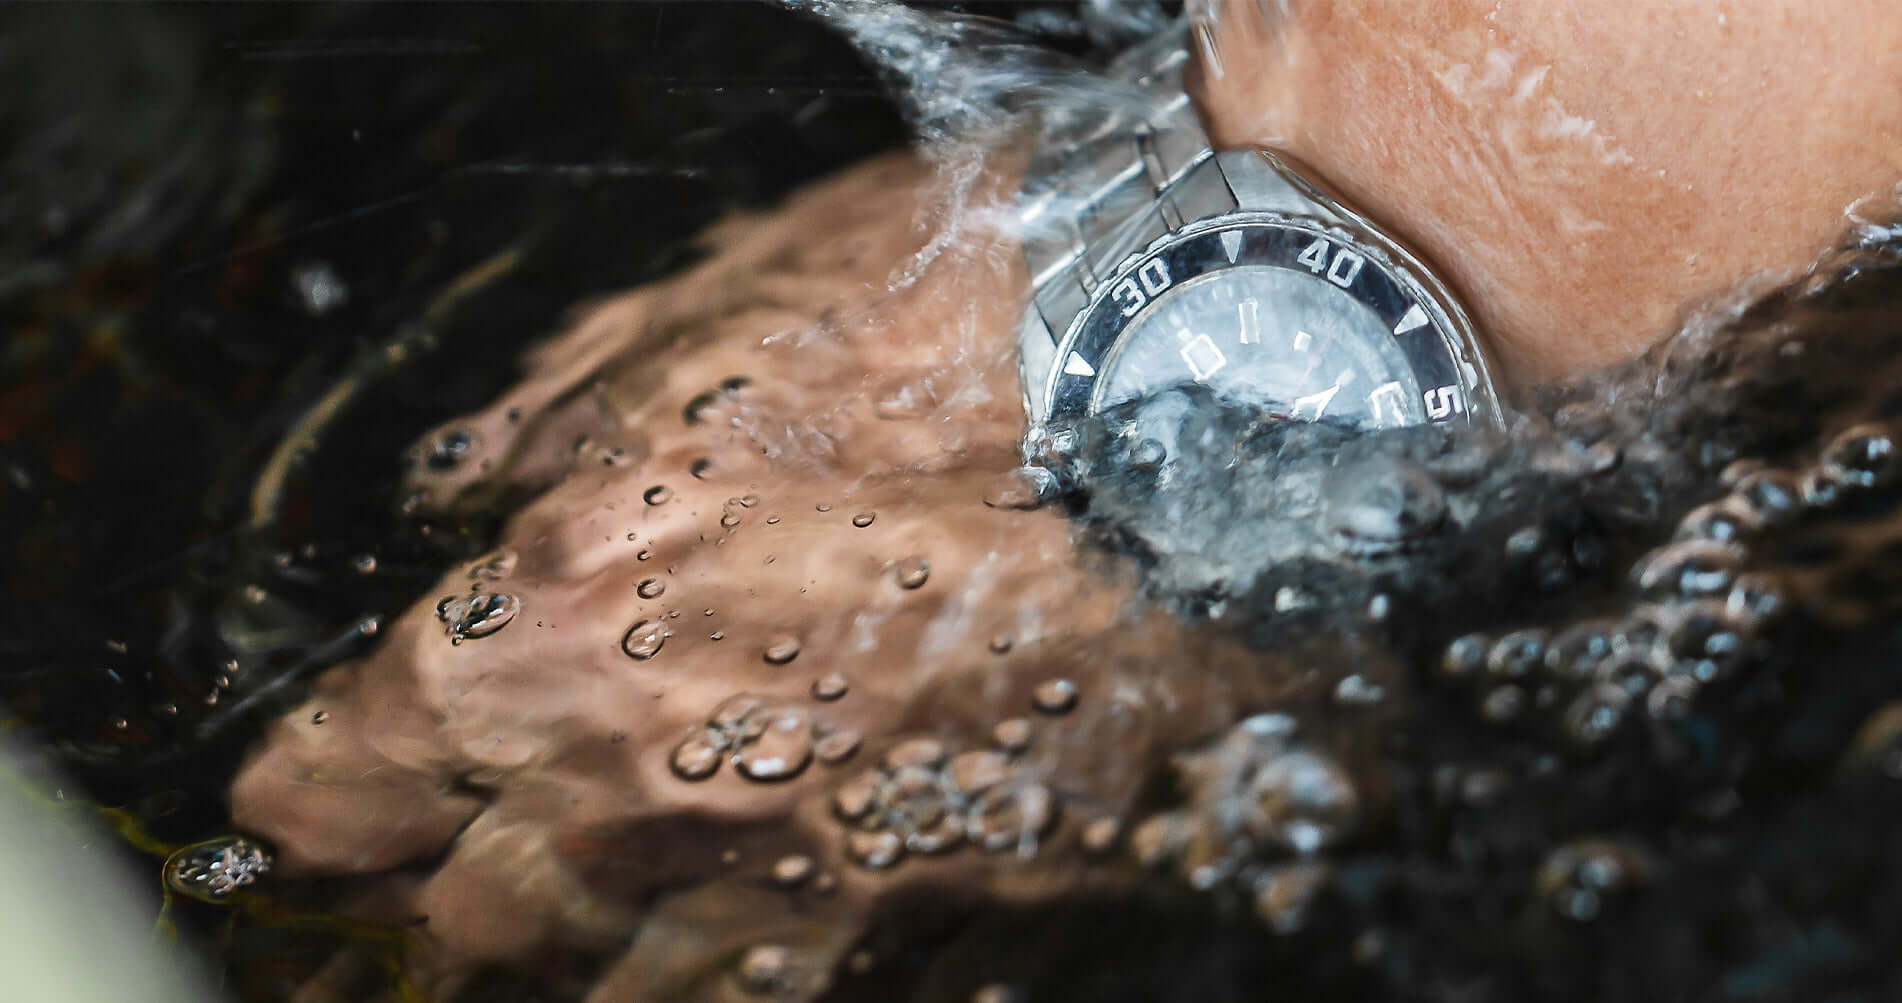 Omega's Ultra Deep Dive Watch Works 6,000 Meters Below Sea Level | WIRED